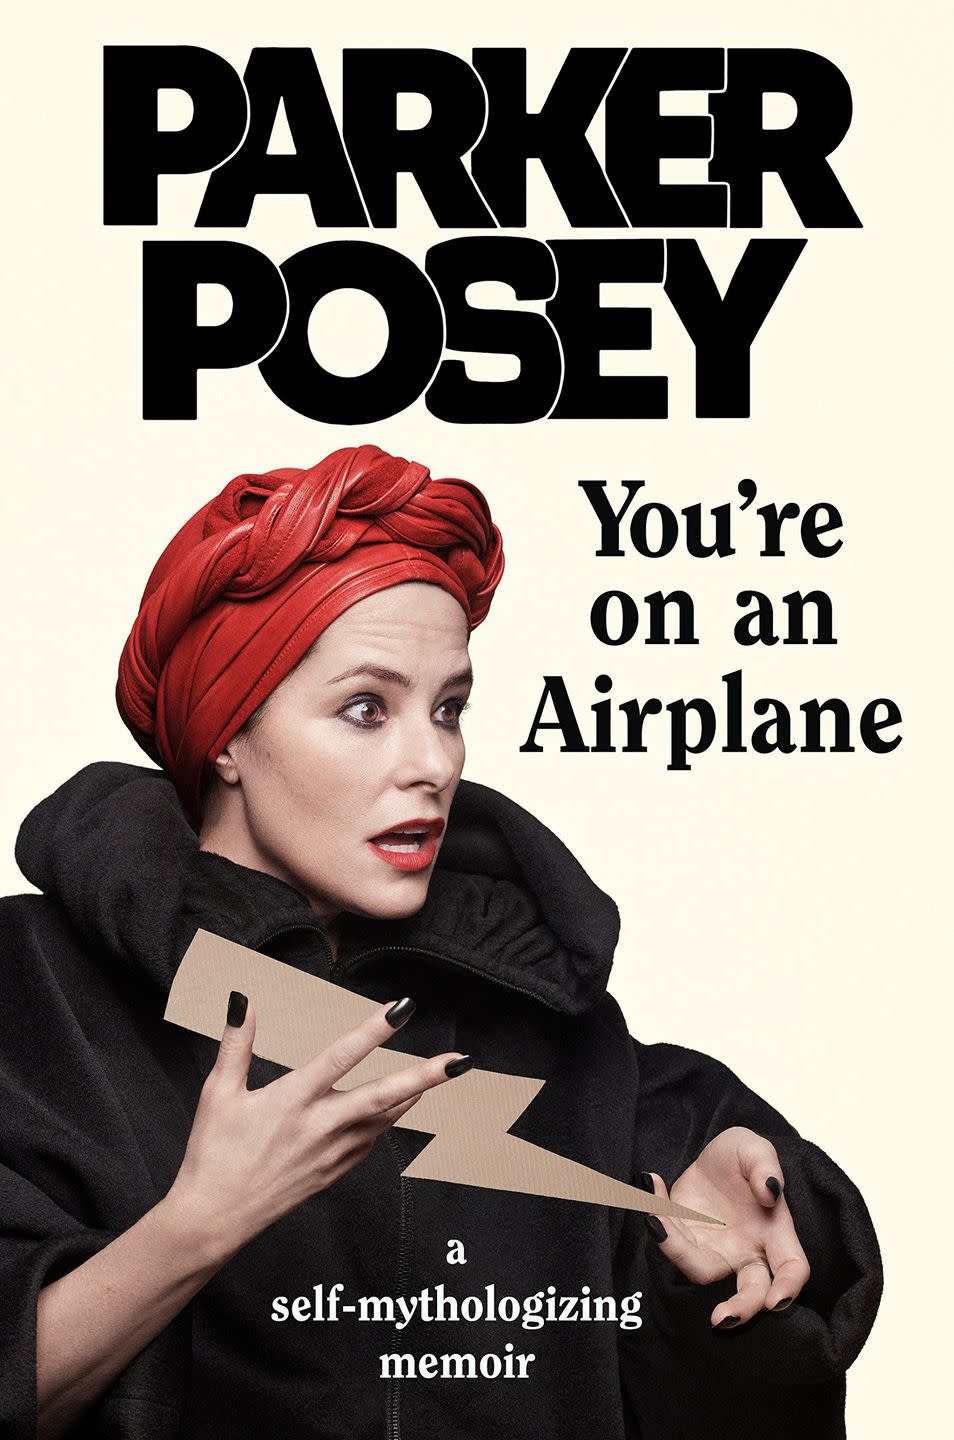 You’re On an Airplane: A Self-Mythologizing Memoir by Parker Posey